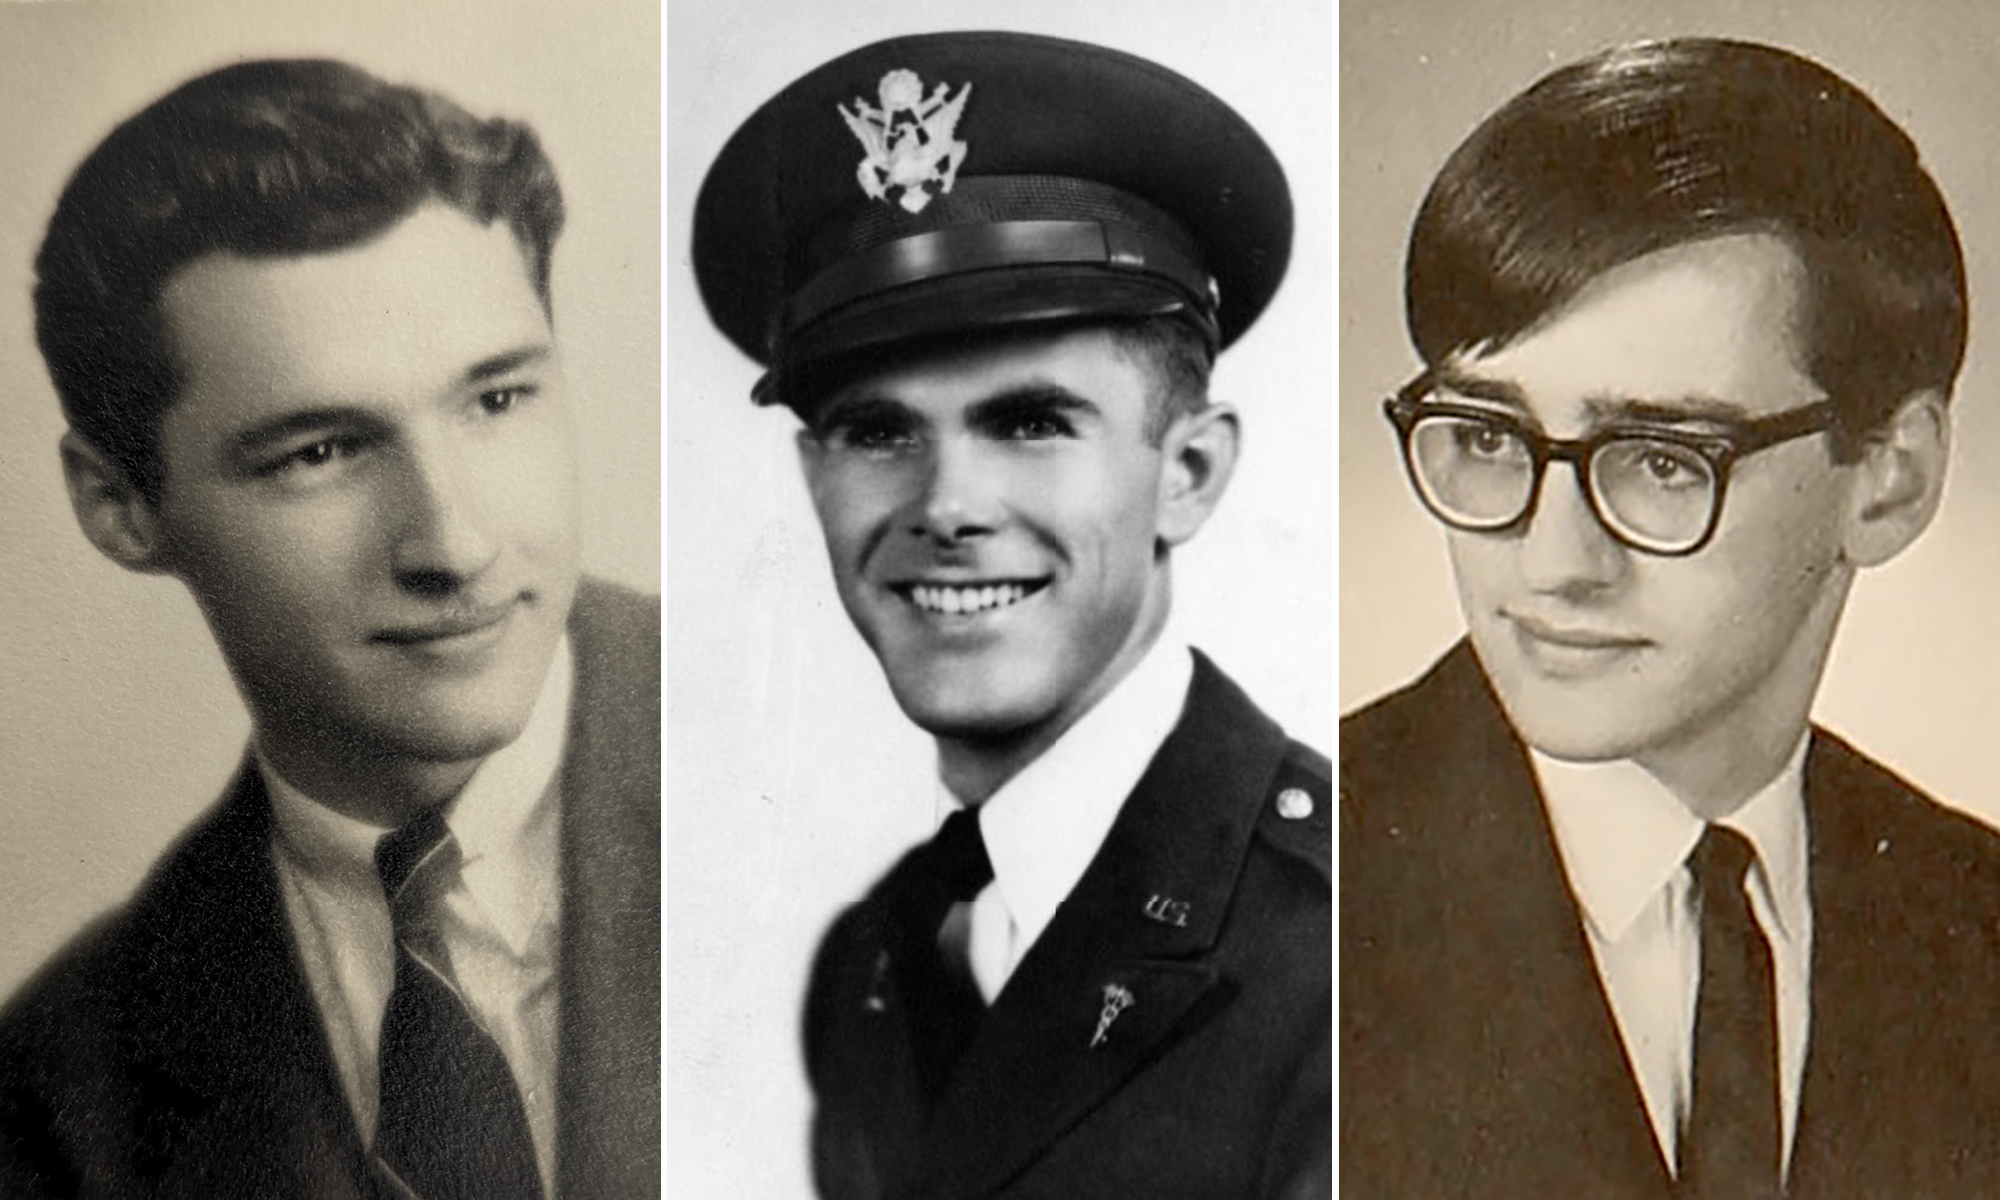 three archival yearbook photos of students from the 1940s and 1960s.